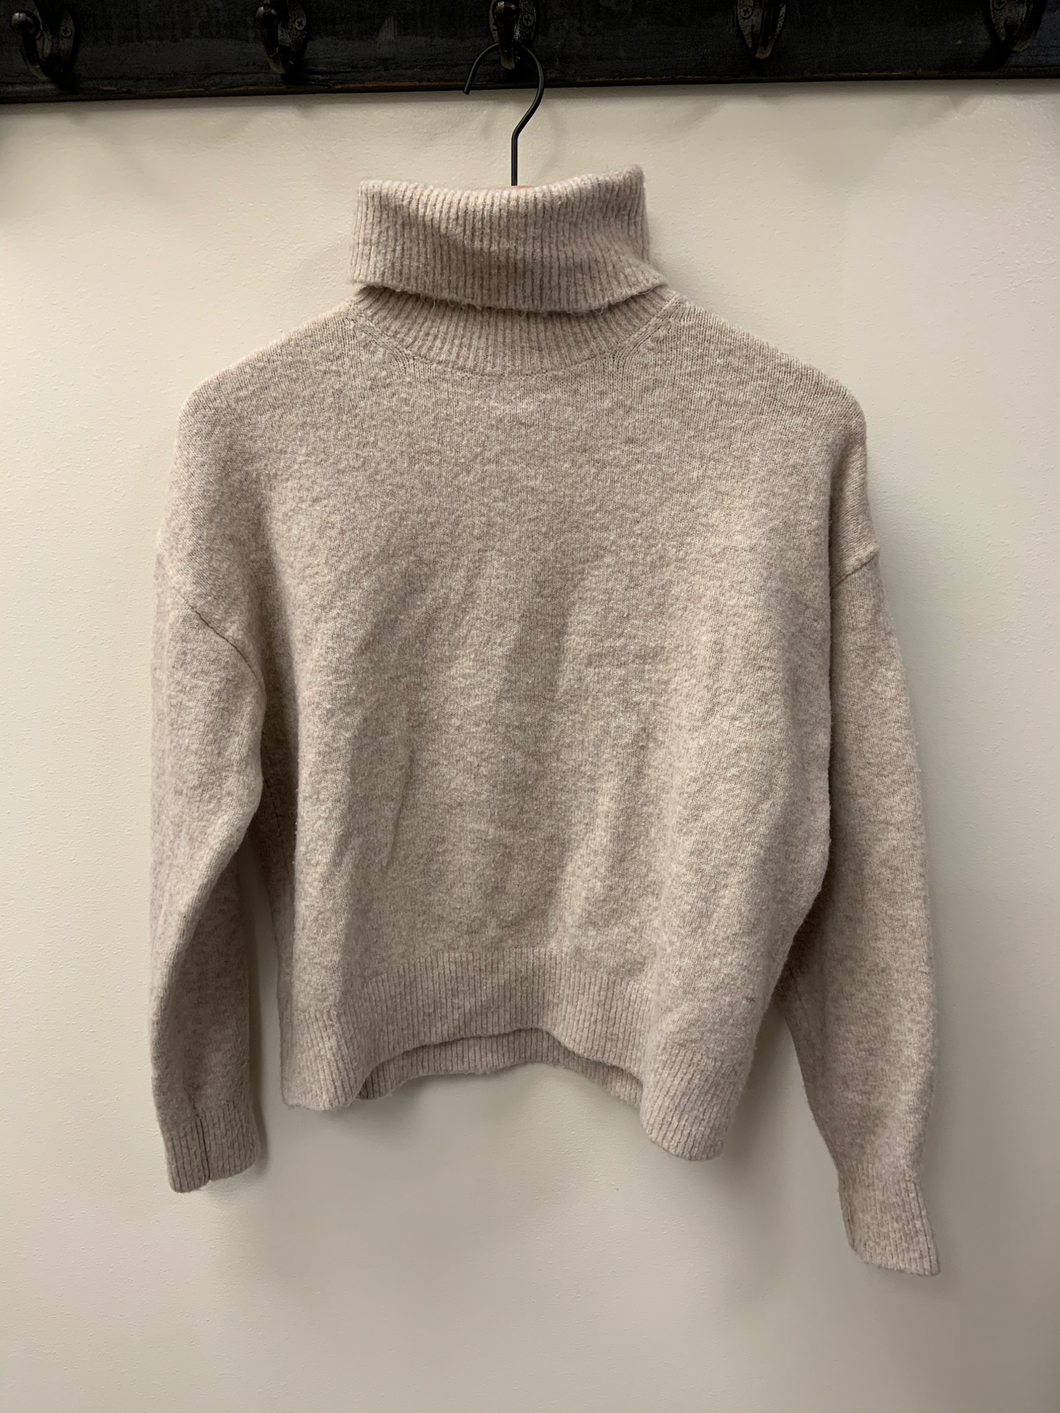 H & M Sweater Size Small